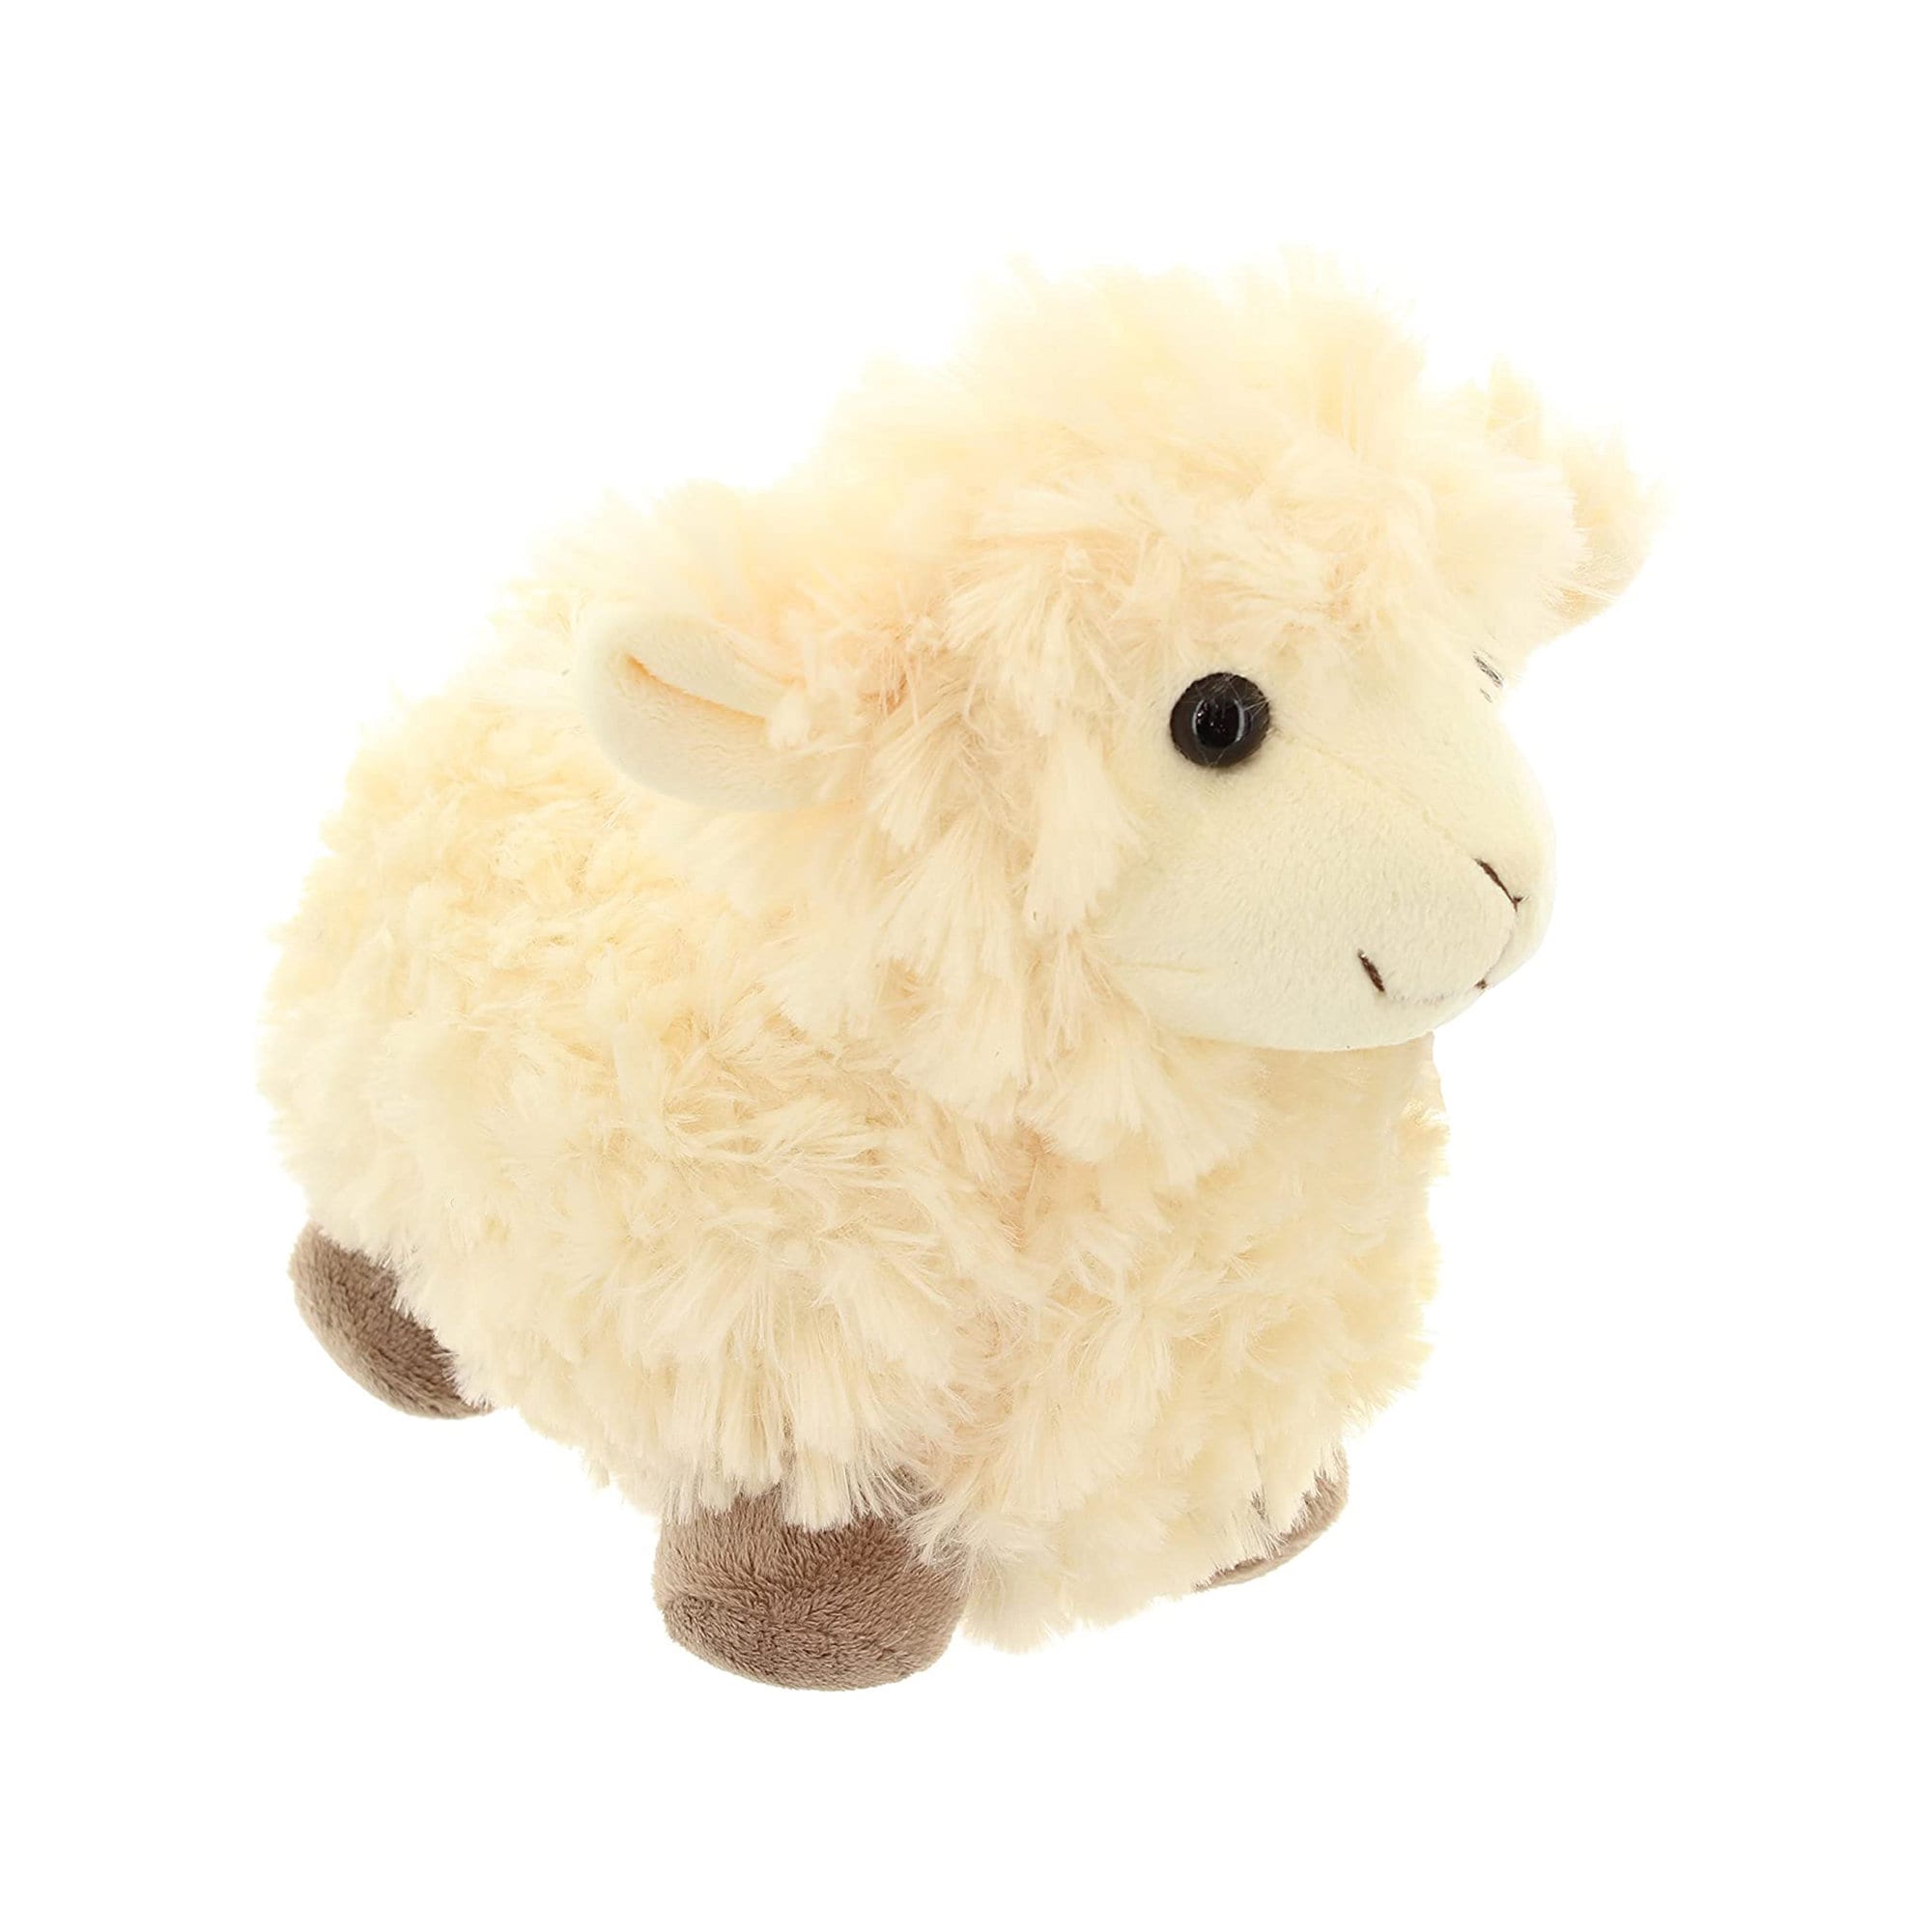 Super Soft Cuddly Toy Sheep Plush Standing Cute Plushie Lamb Gift for Kids  Teddy Bear anxiety School Toy Collectible Sheep Stuffed Animal -  Canada